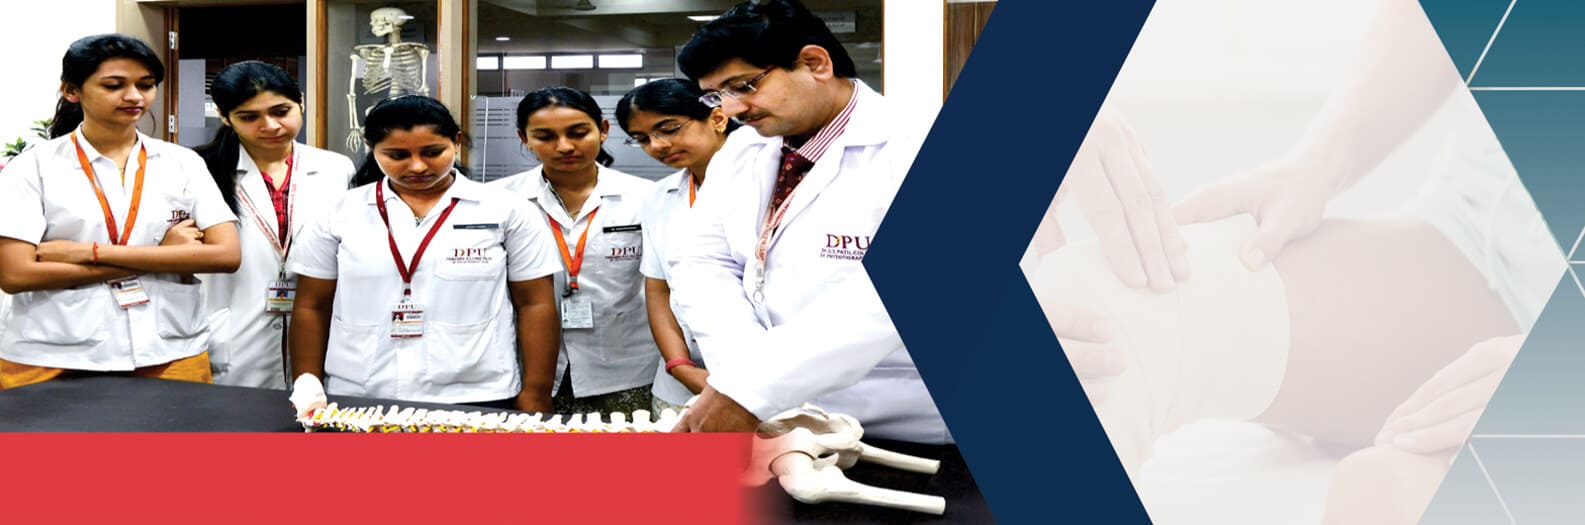 Dr. D. Y. Patil College of Physiotherapy 